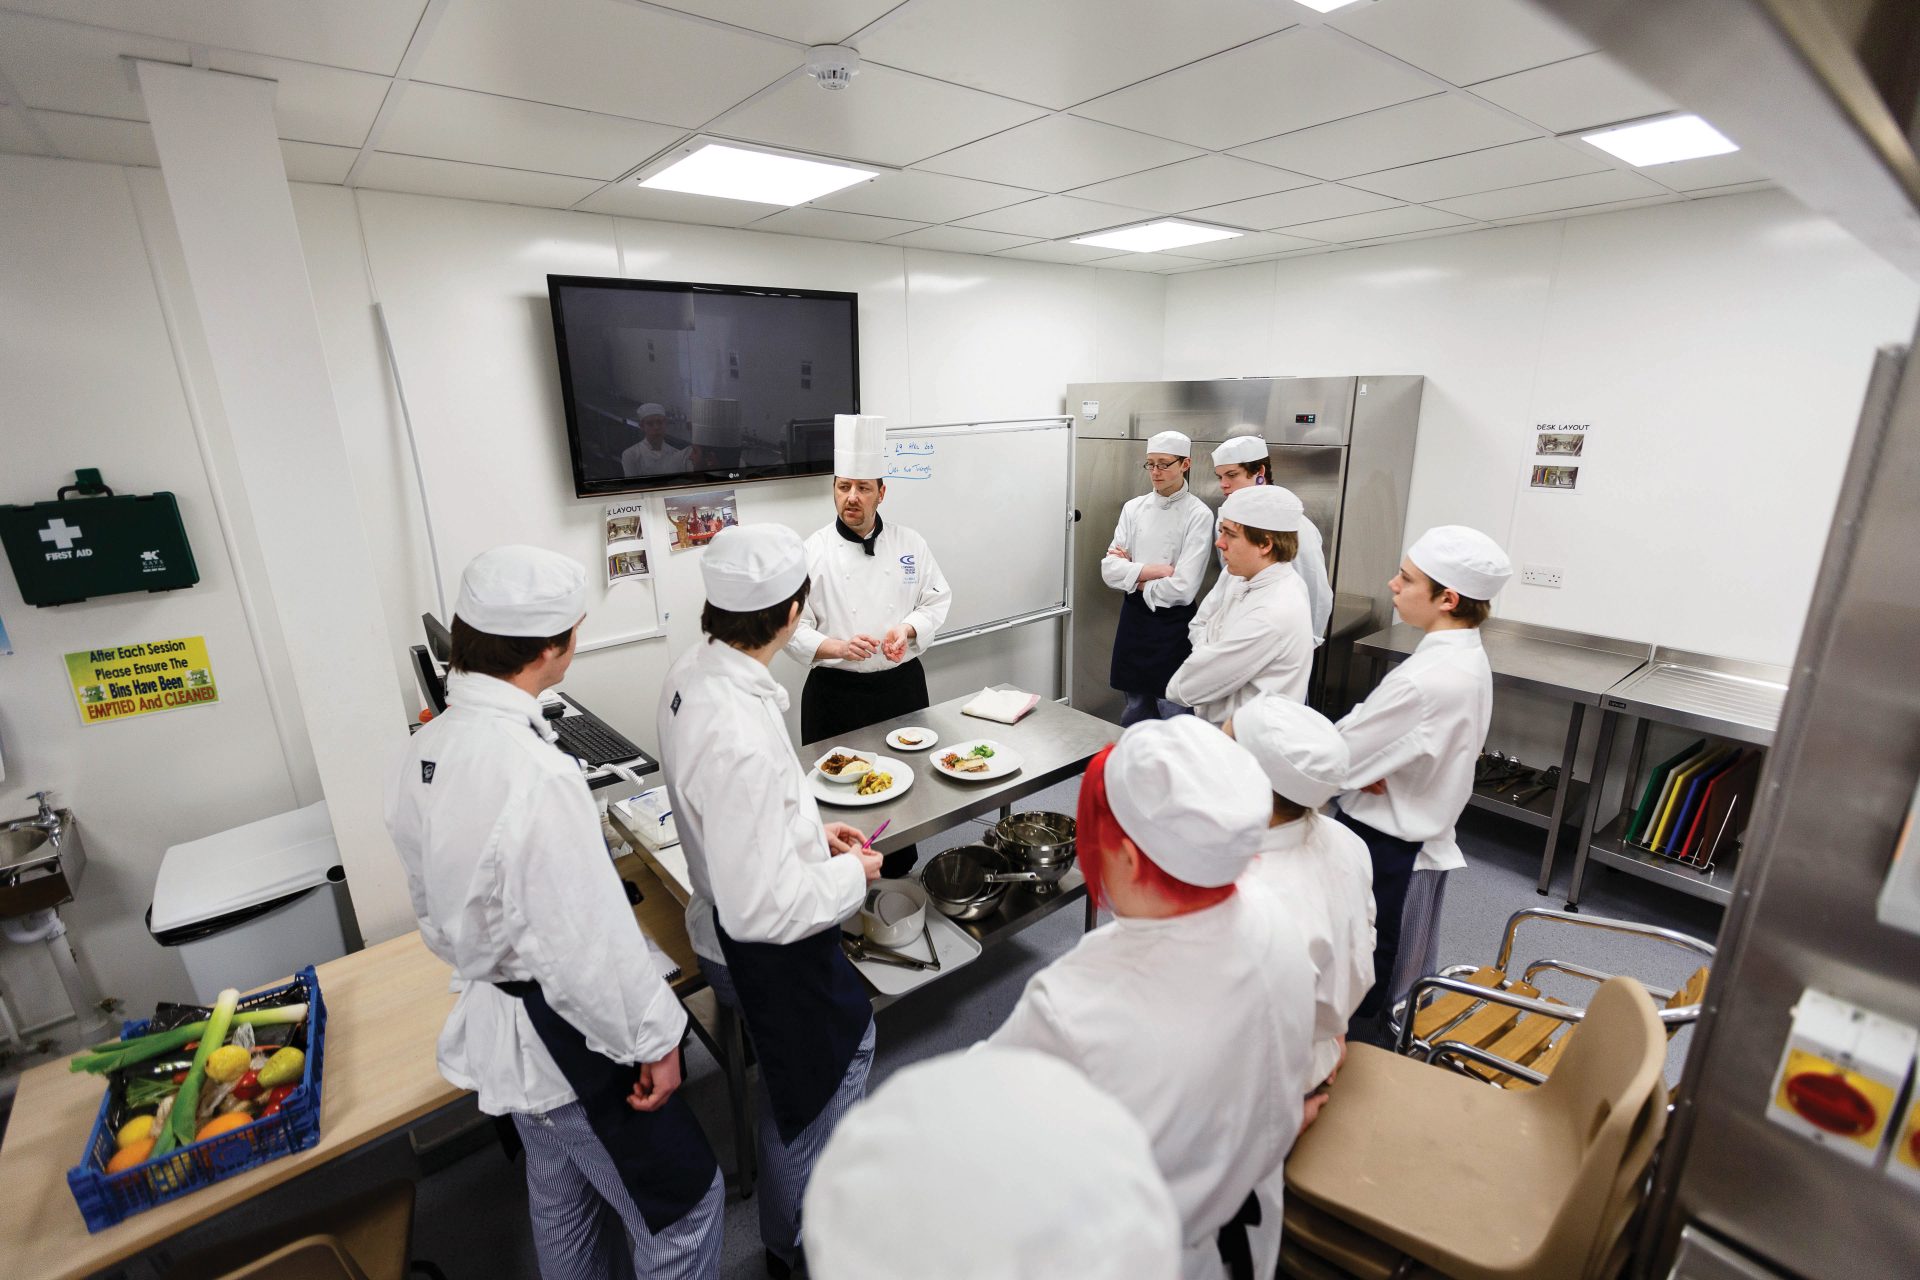 Group of chef students being taught by chef lecturer in training kitchens at Cornwall College